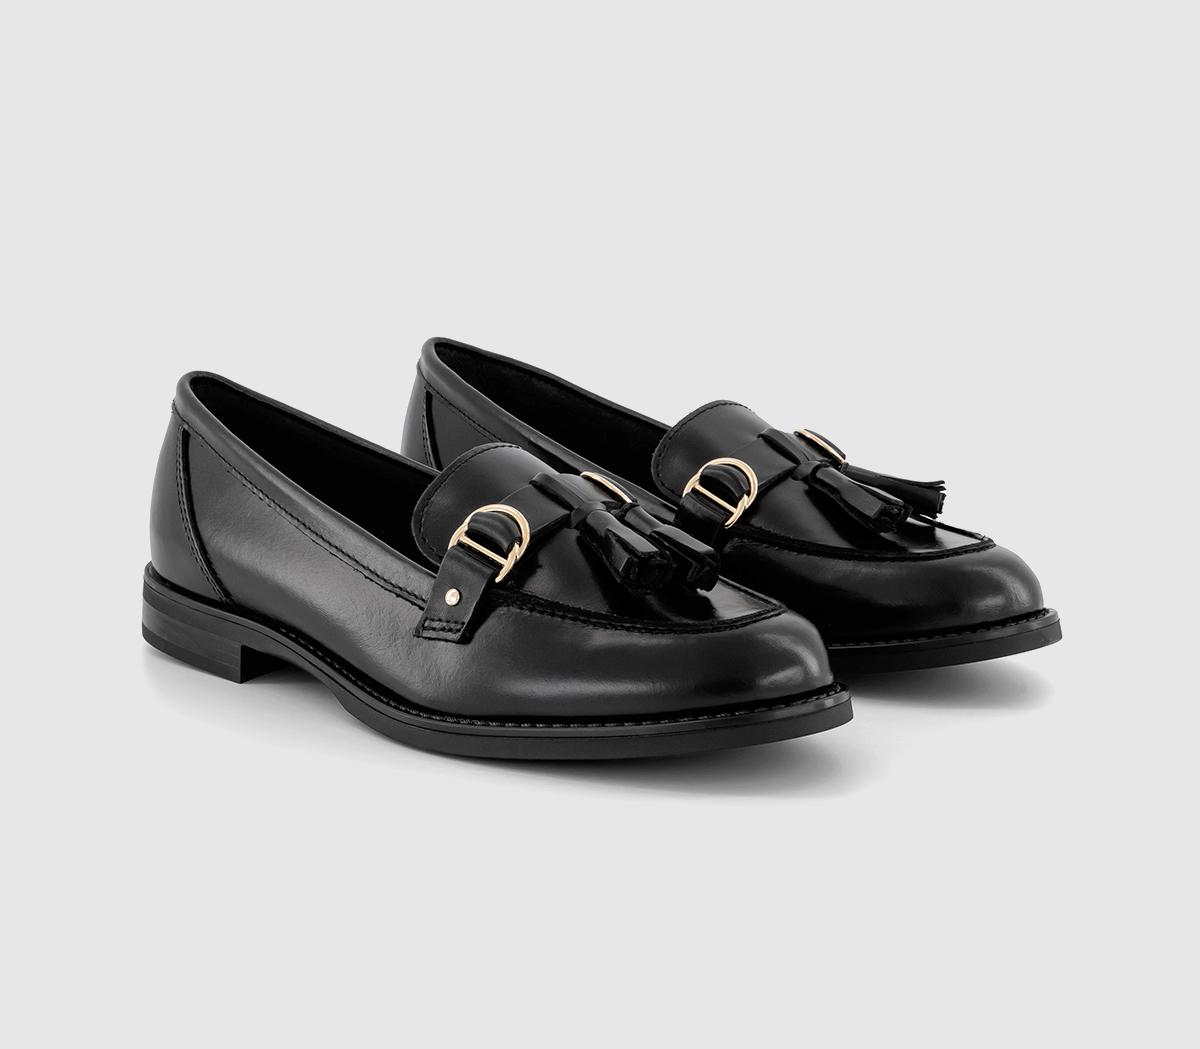 OFFICE Feels Leather Trim Tassel Loafer Black Leather - Flat Shoes for ...